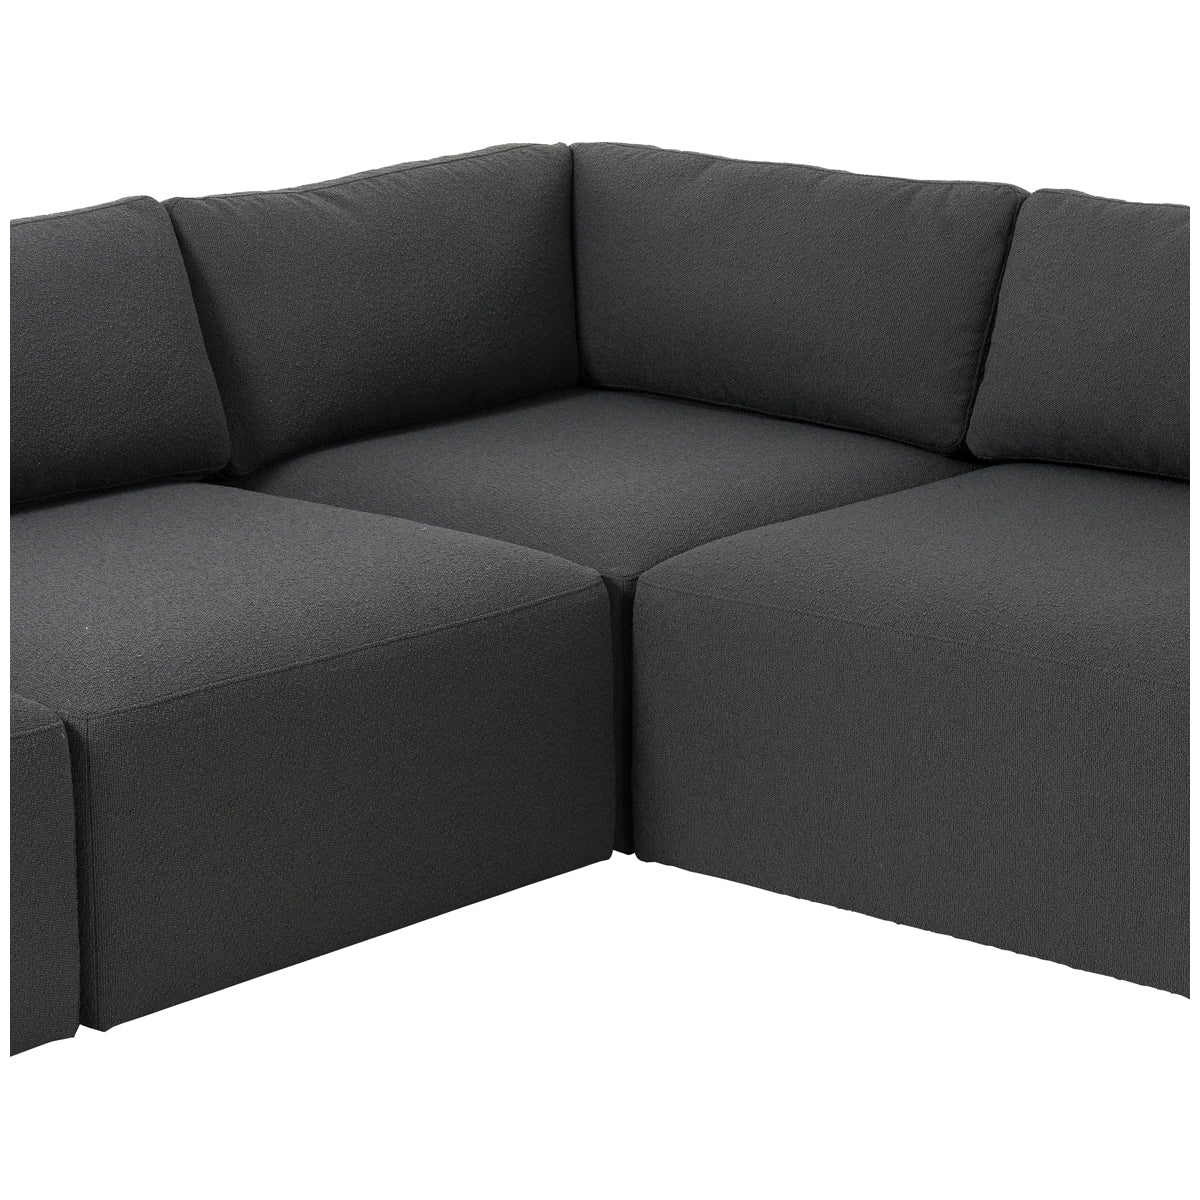 Four Hands Kensington Brylee Fiqa 4-Piece Sectional with Ottoman